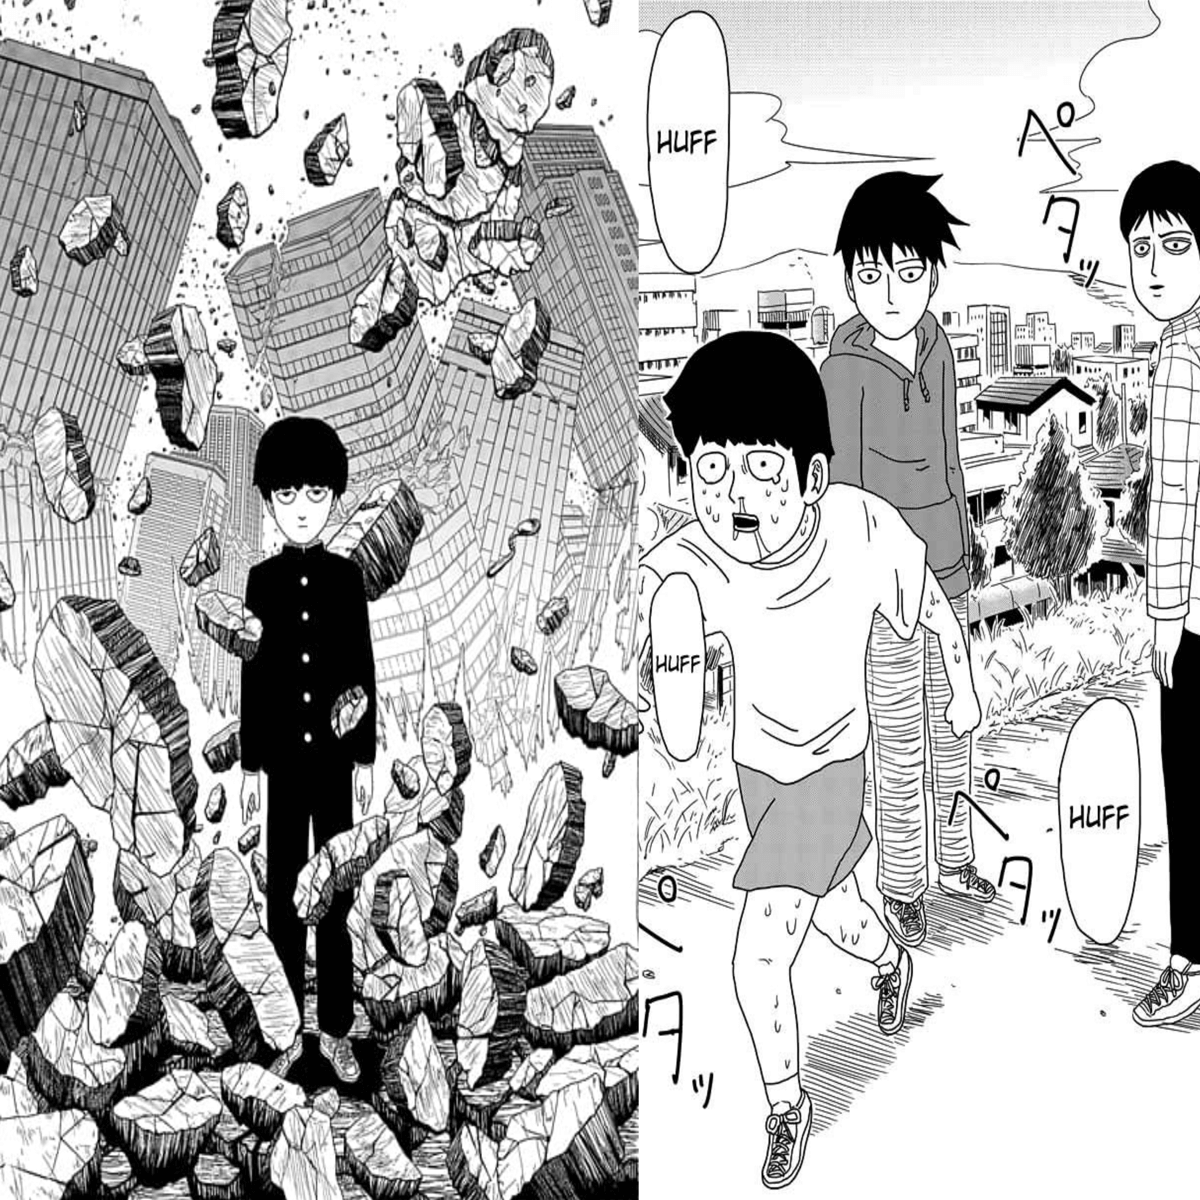 Mob Psycho 100 Returns for Season 3 This October